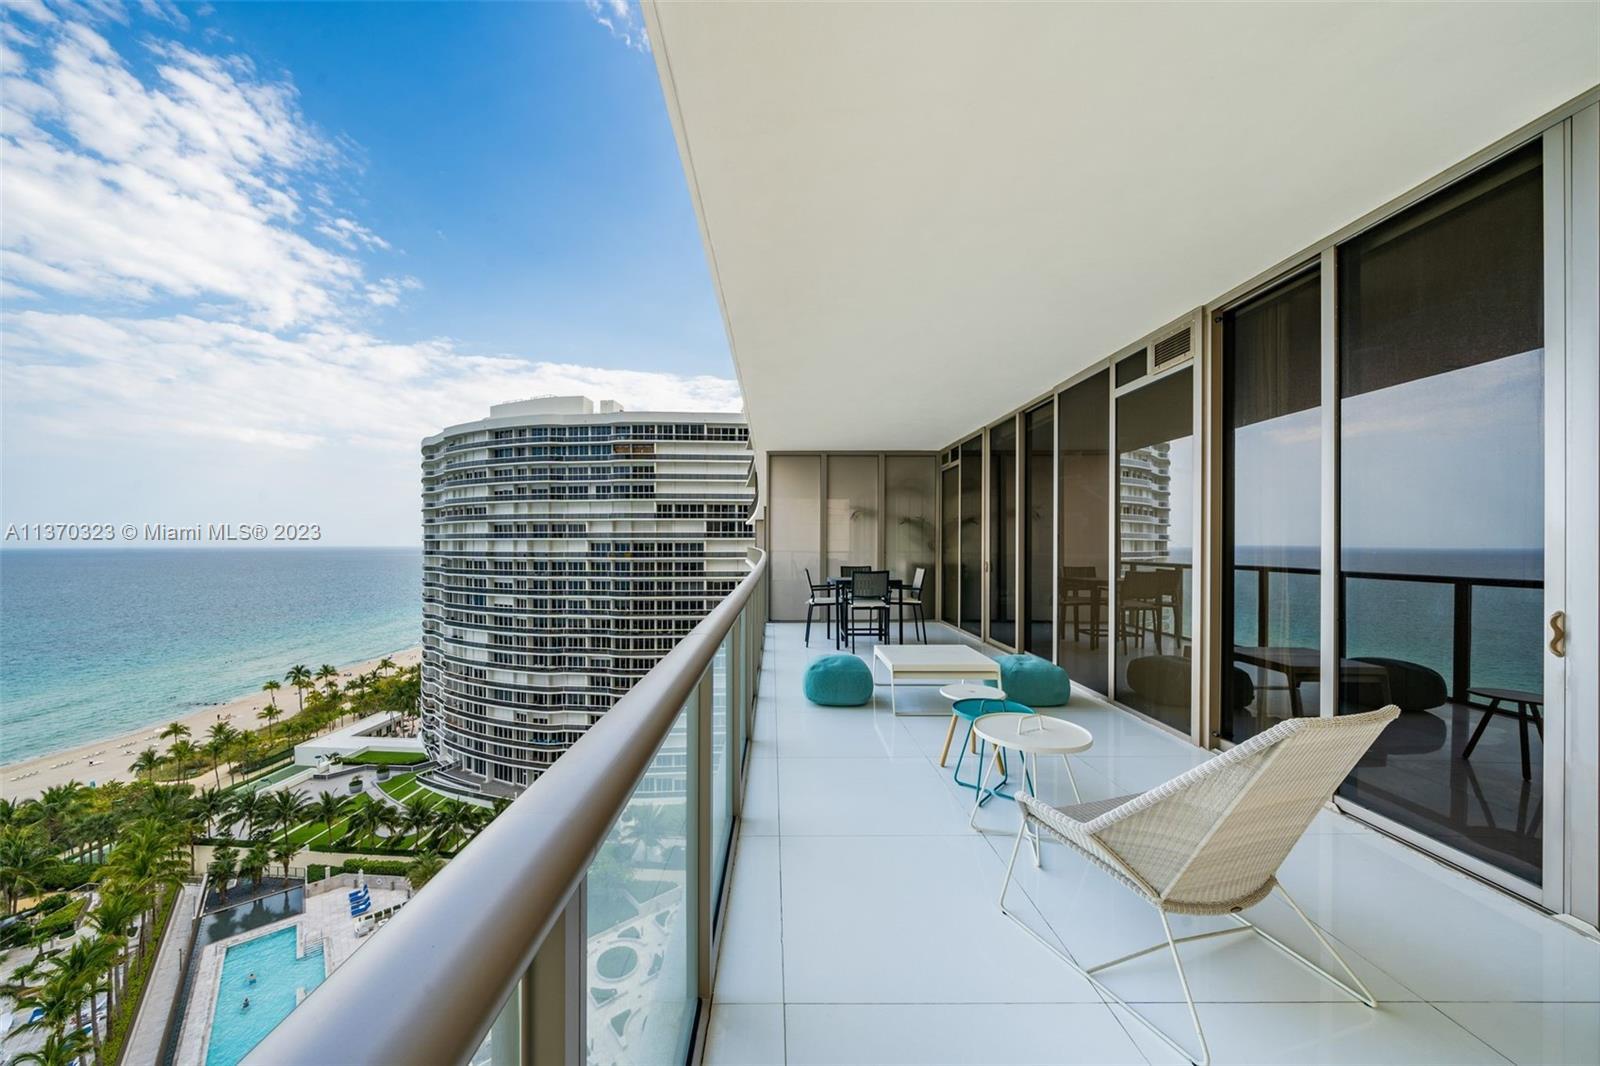 Spectacular 4 bedrooms, 4.5 bath residence at the iconic St. Regis Bal Harbour featuring east & west